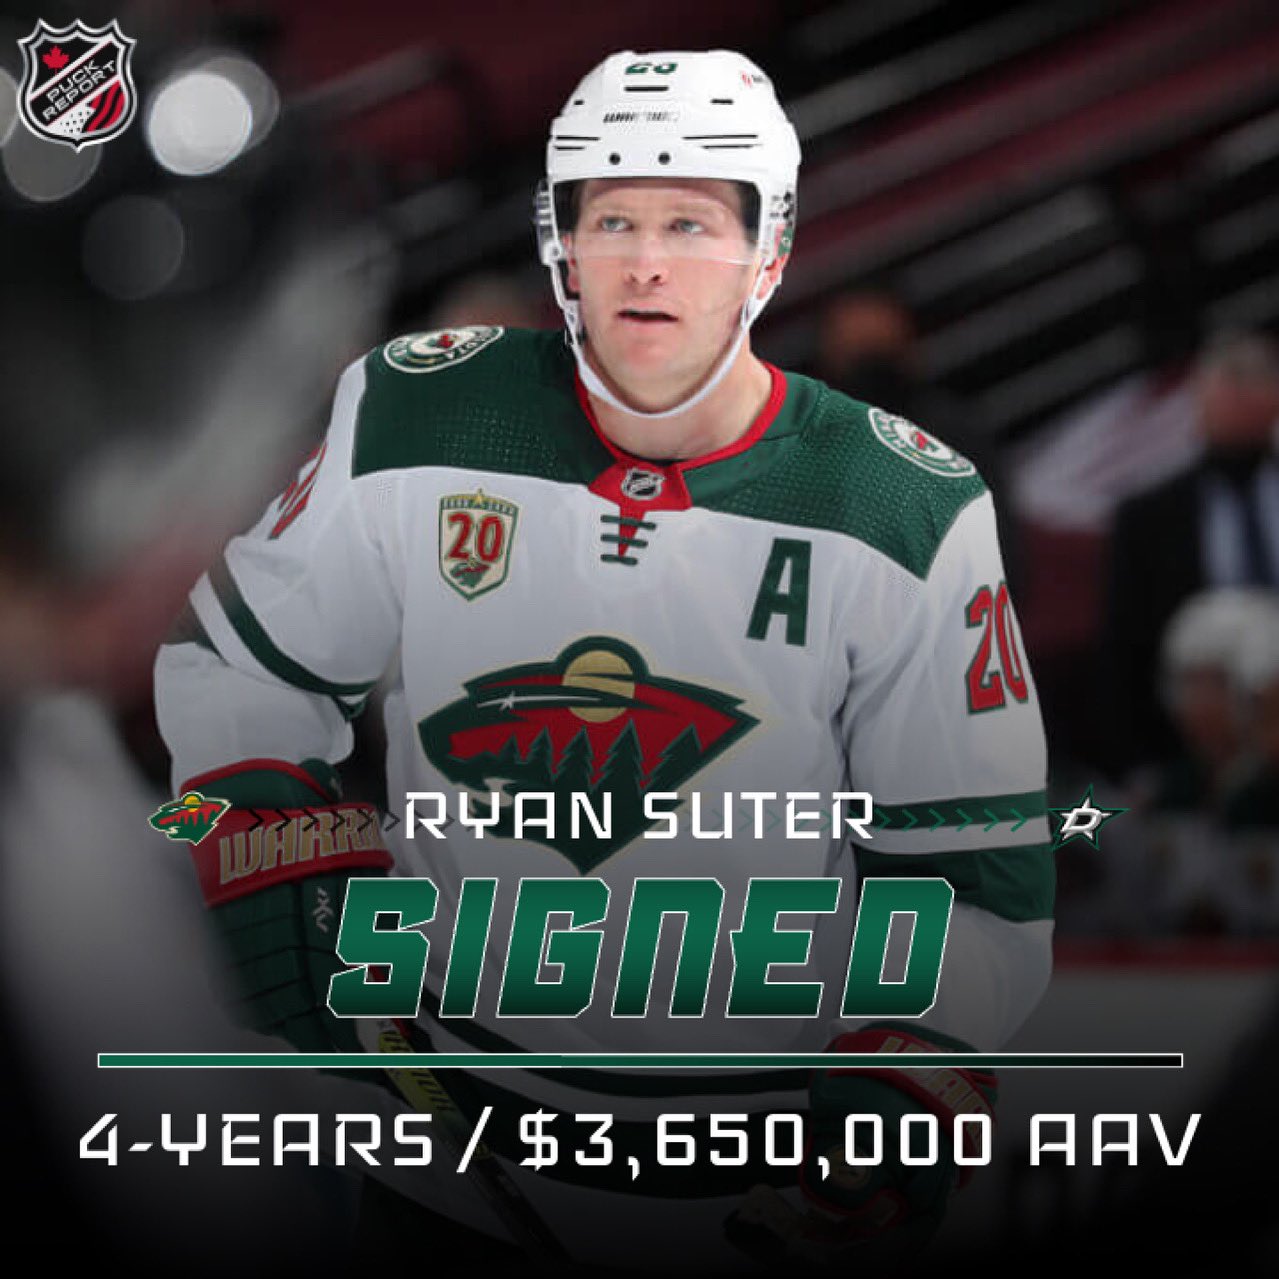 Ryan Suter Signs Multi-Year Contract With Stars - The Hockey News